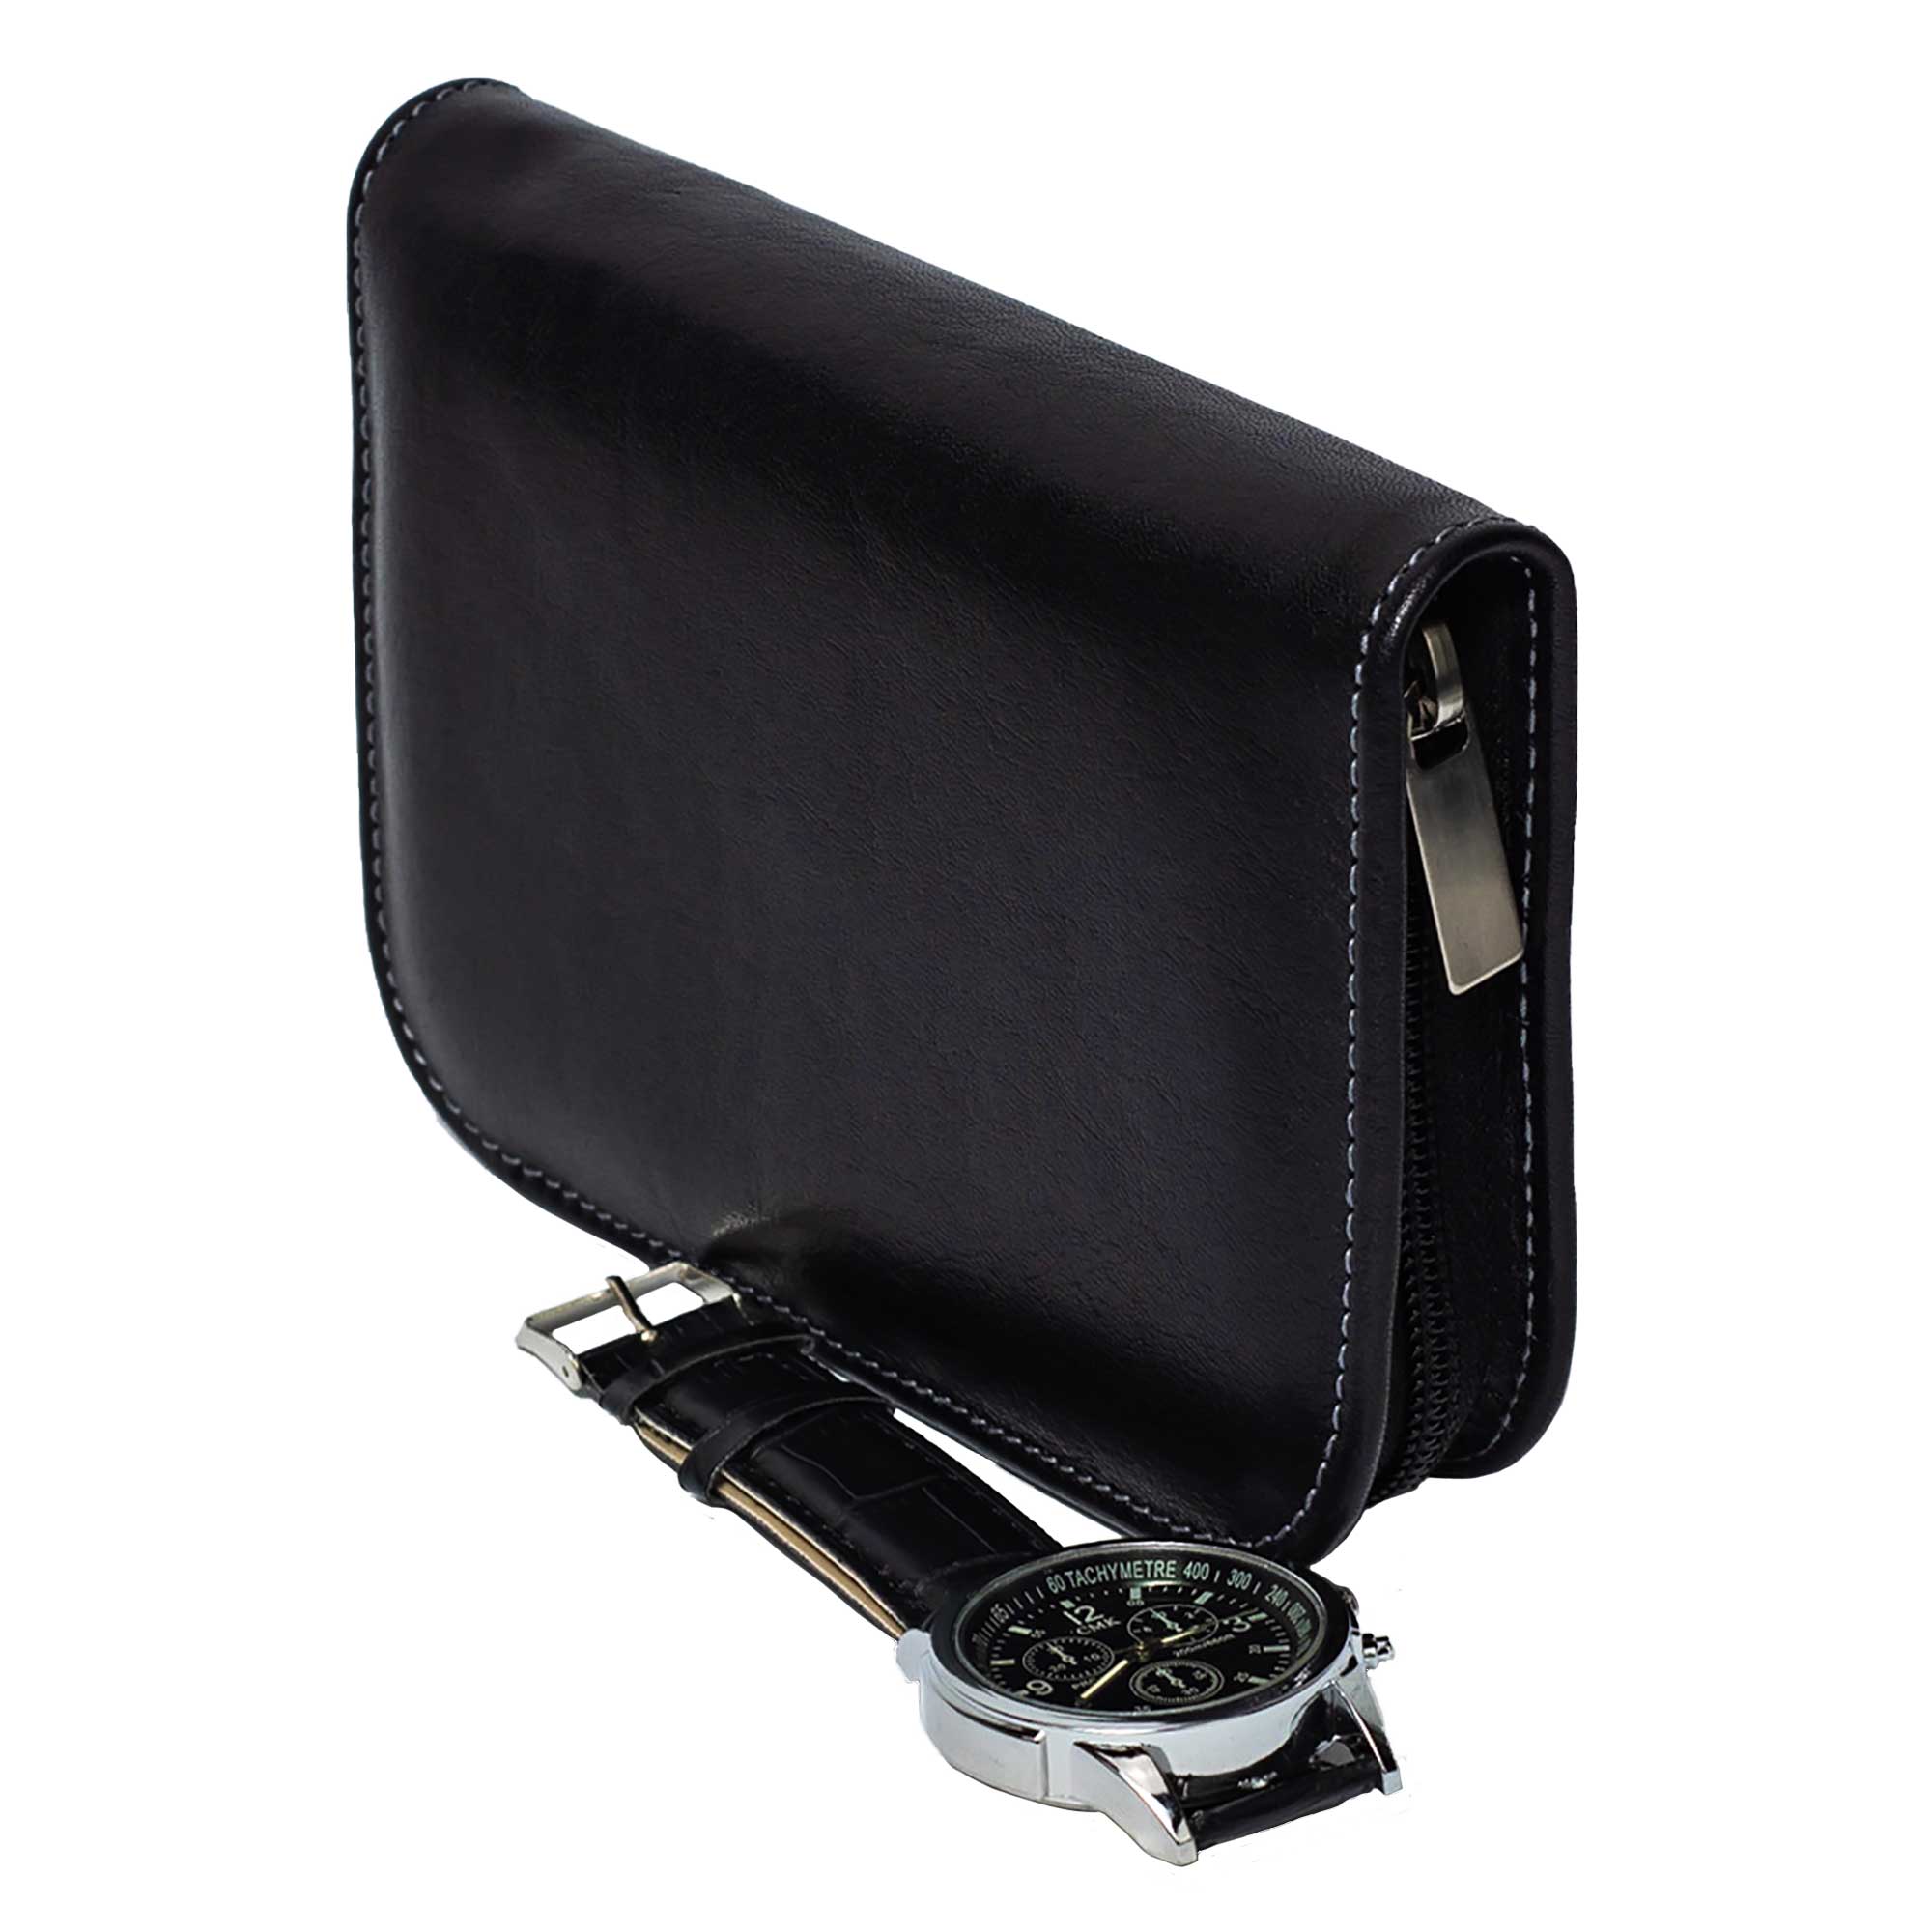 DiLoro Italian Leather Black Zippered Travel Watch Case for 4 Watches Made in Italy - Side View